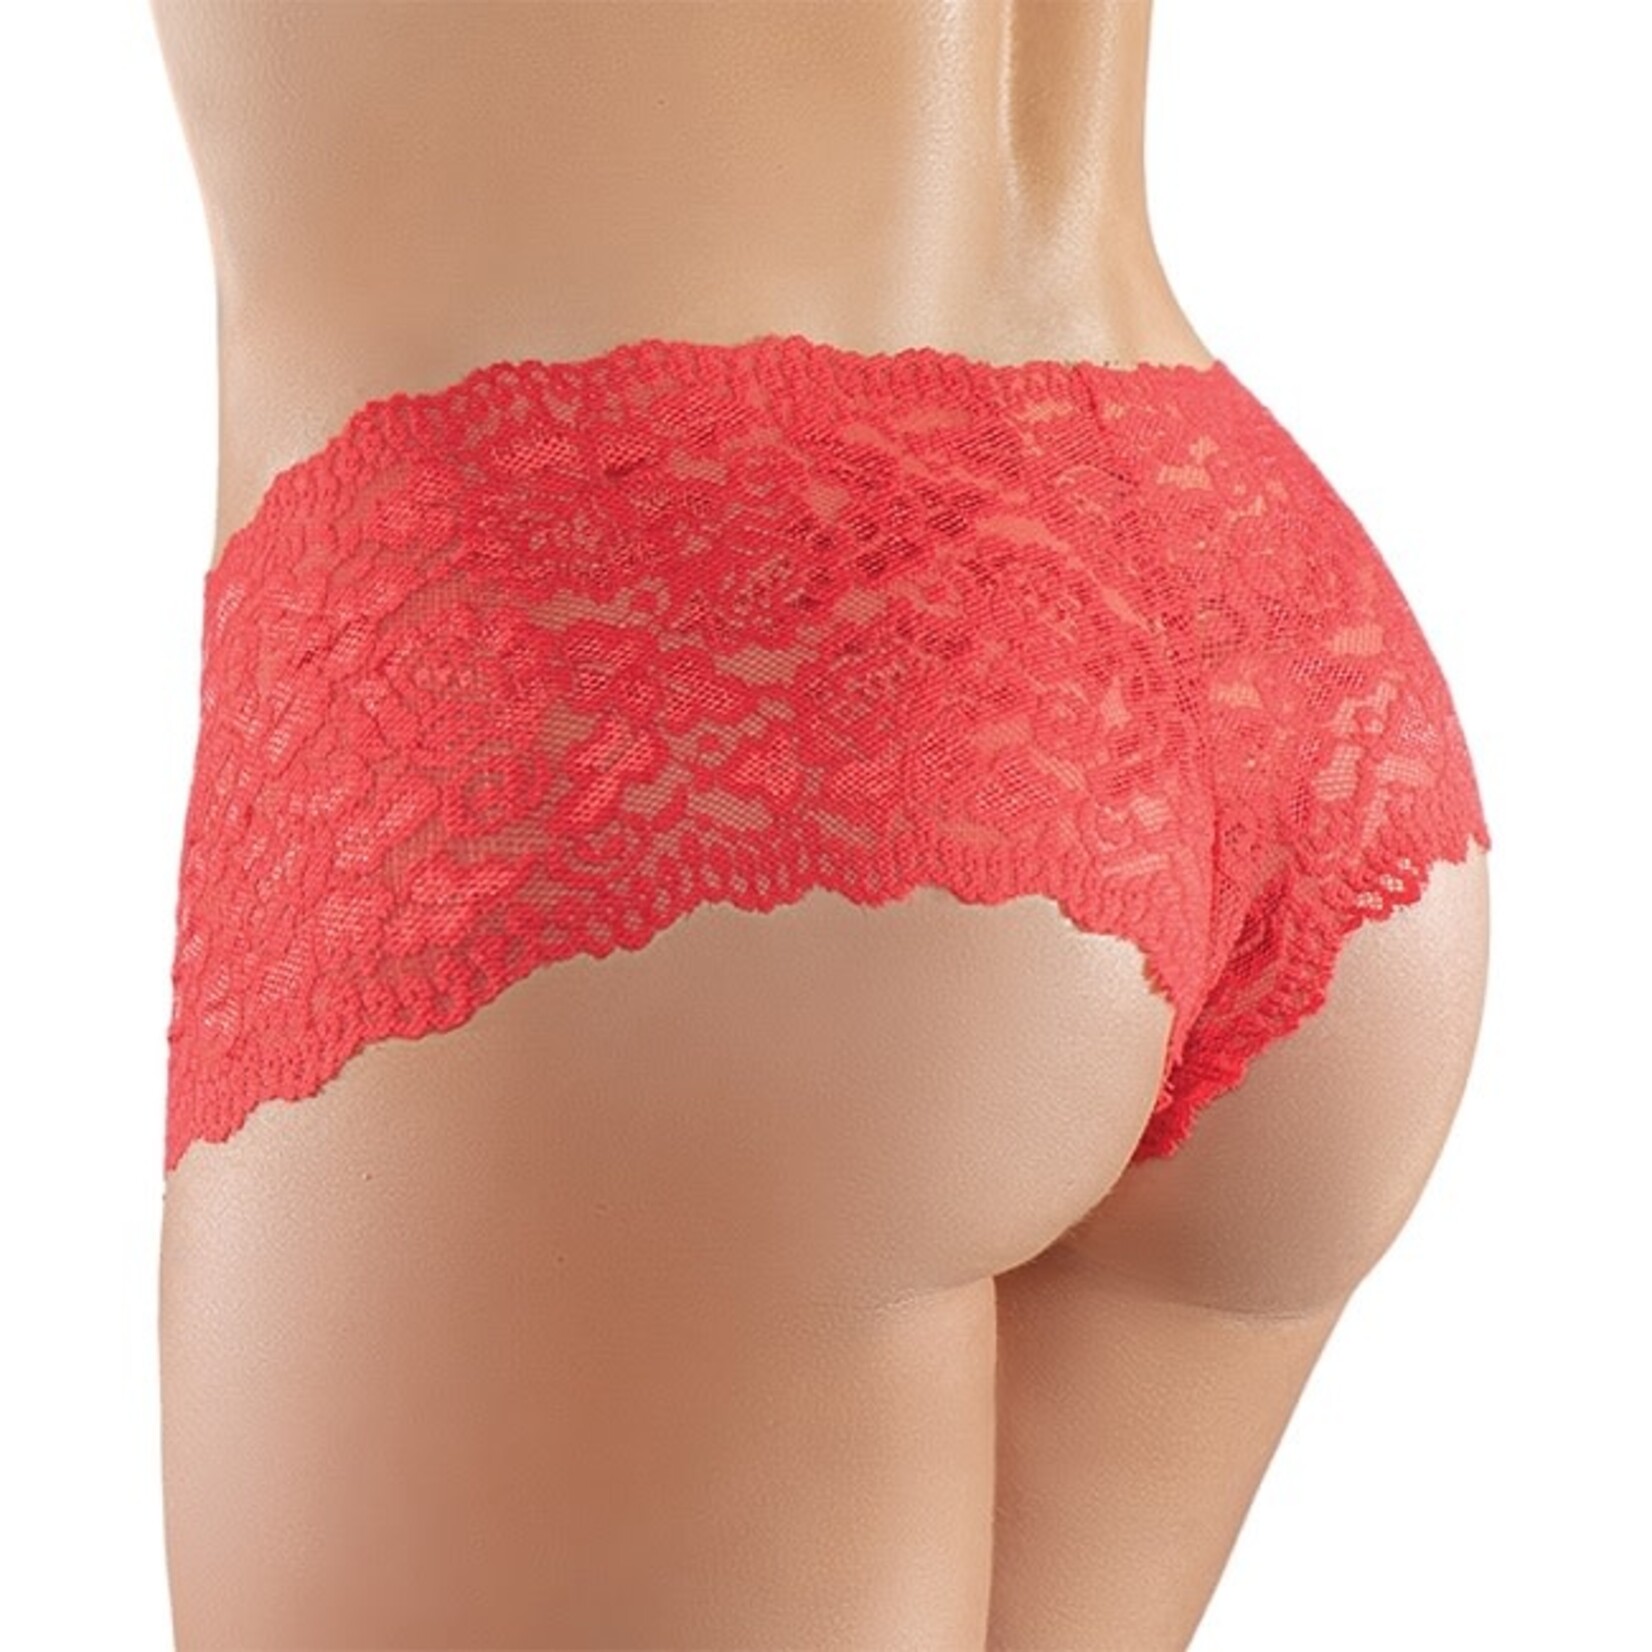 Allure Lingerie Adore by Allure Candy Apple Panty OS